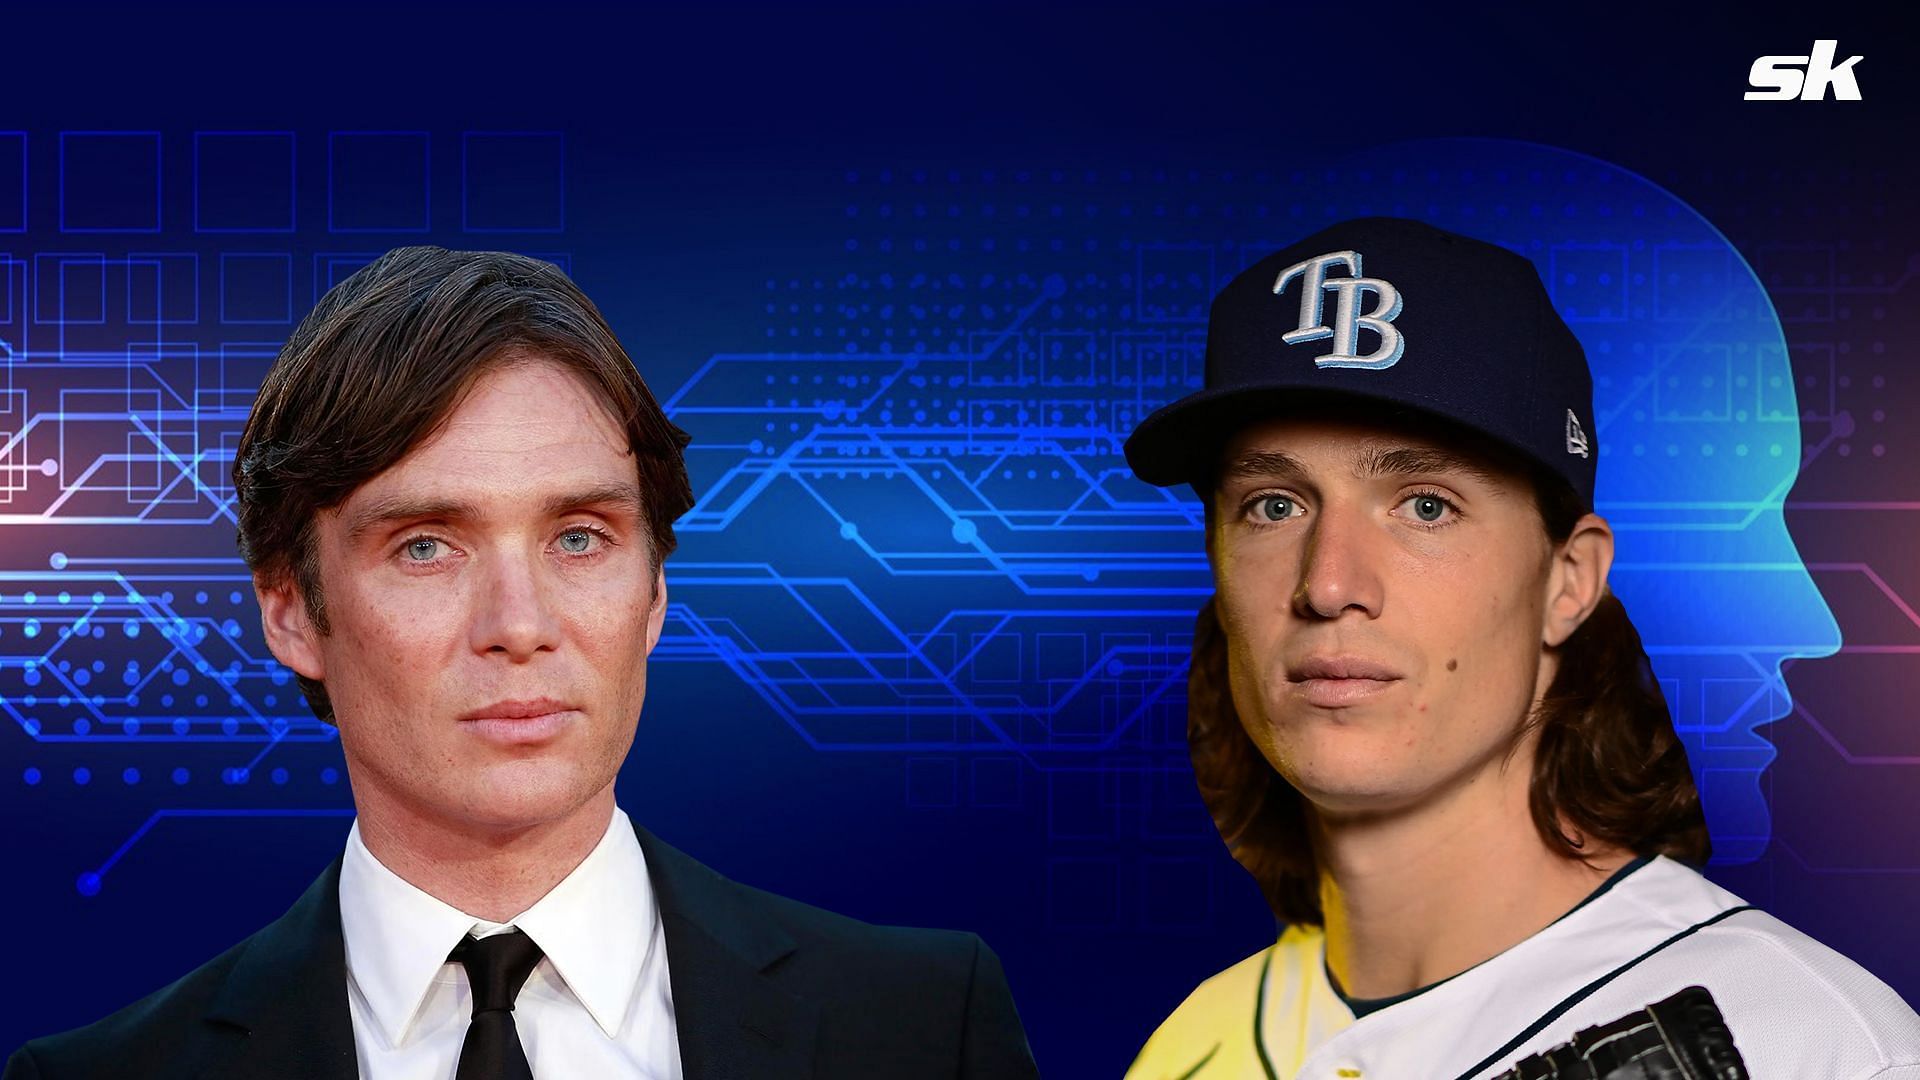 Actor Cillian Murphy comments on Rays doppelganger Tyler Glasnow